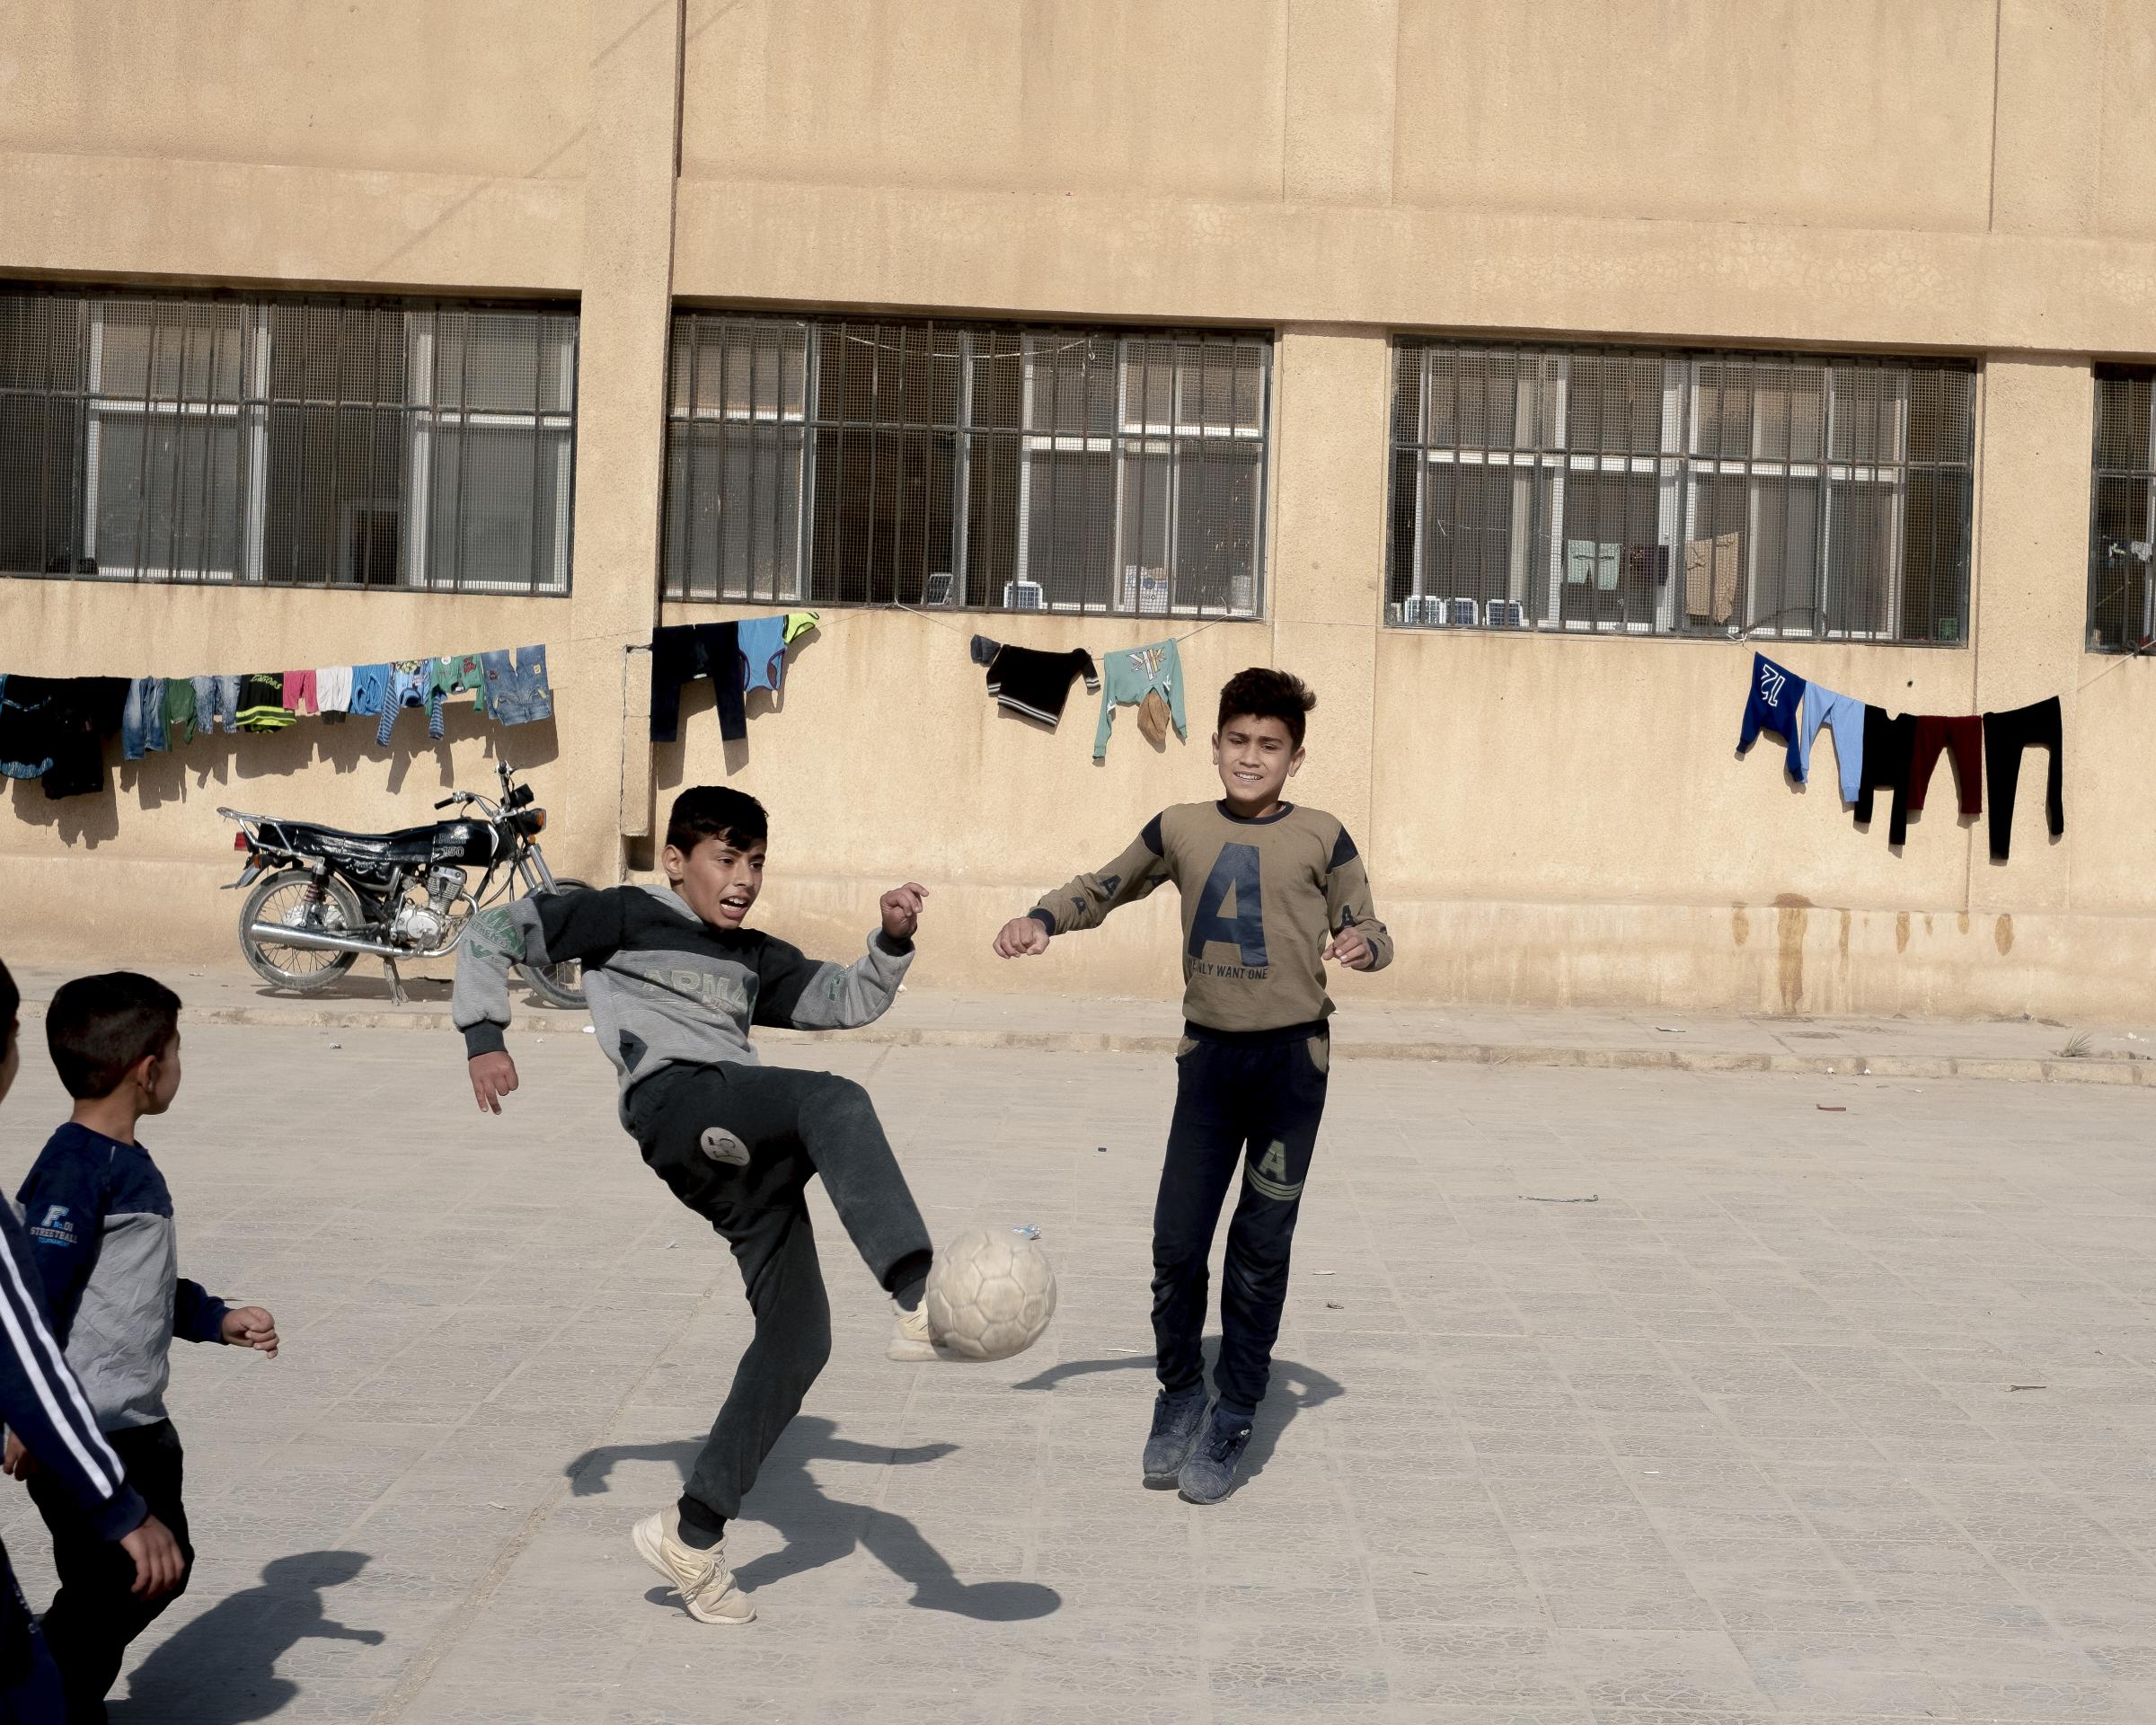 On National Geographic: 11 years into Syria's civil war, this is what life looks like -   Right : Children play soccer in a school converted into a shelter for civilians displaced by...